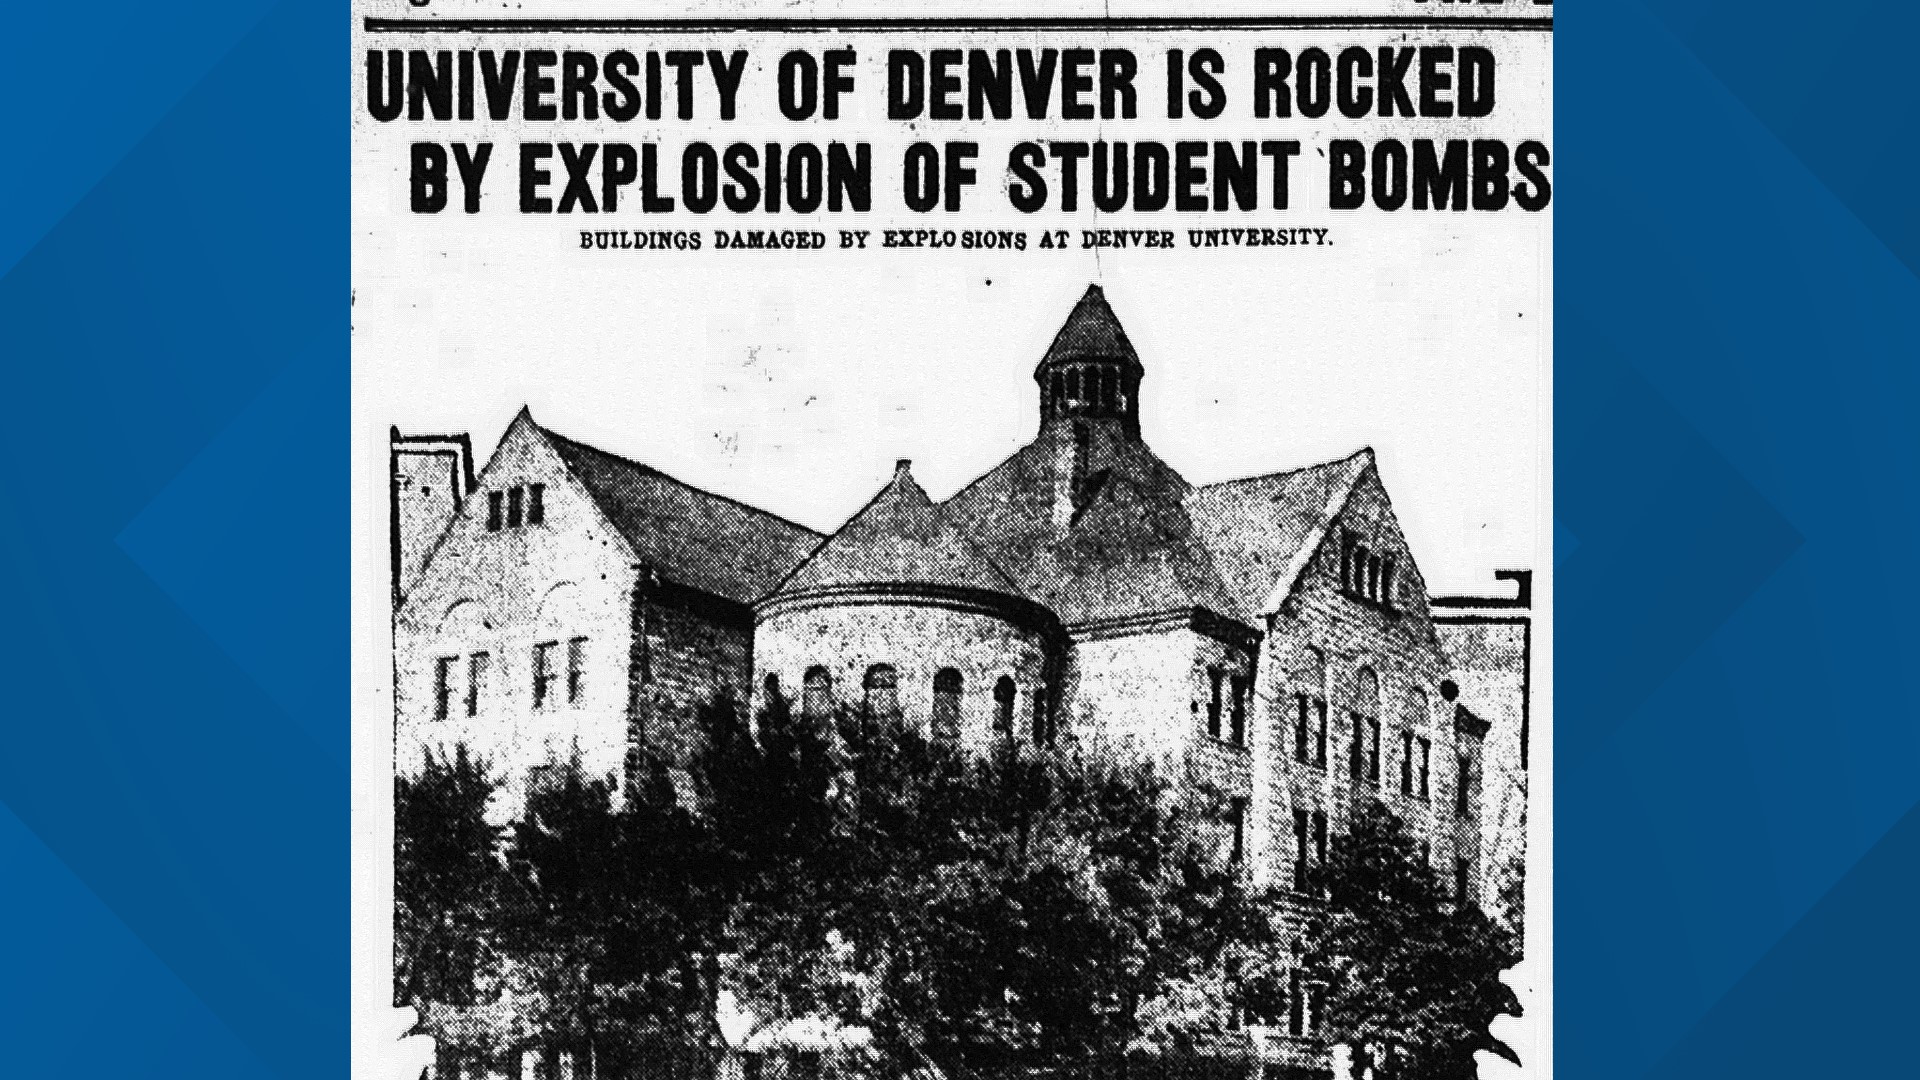 A prank 100 years ago ignited the rivalry between the University of Denver and Colorado School of Mines.